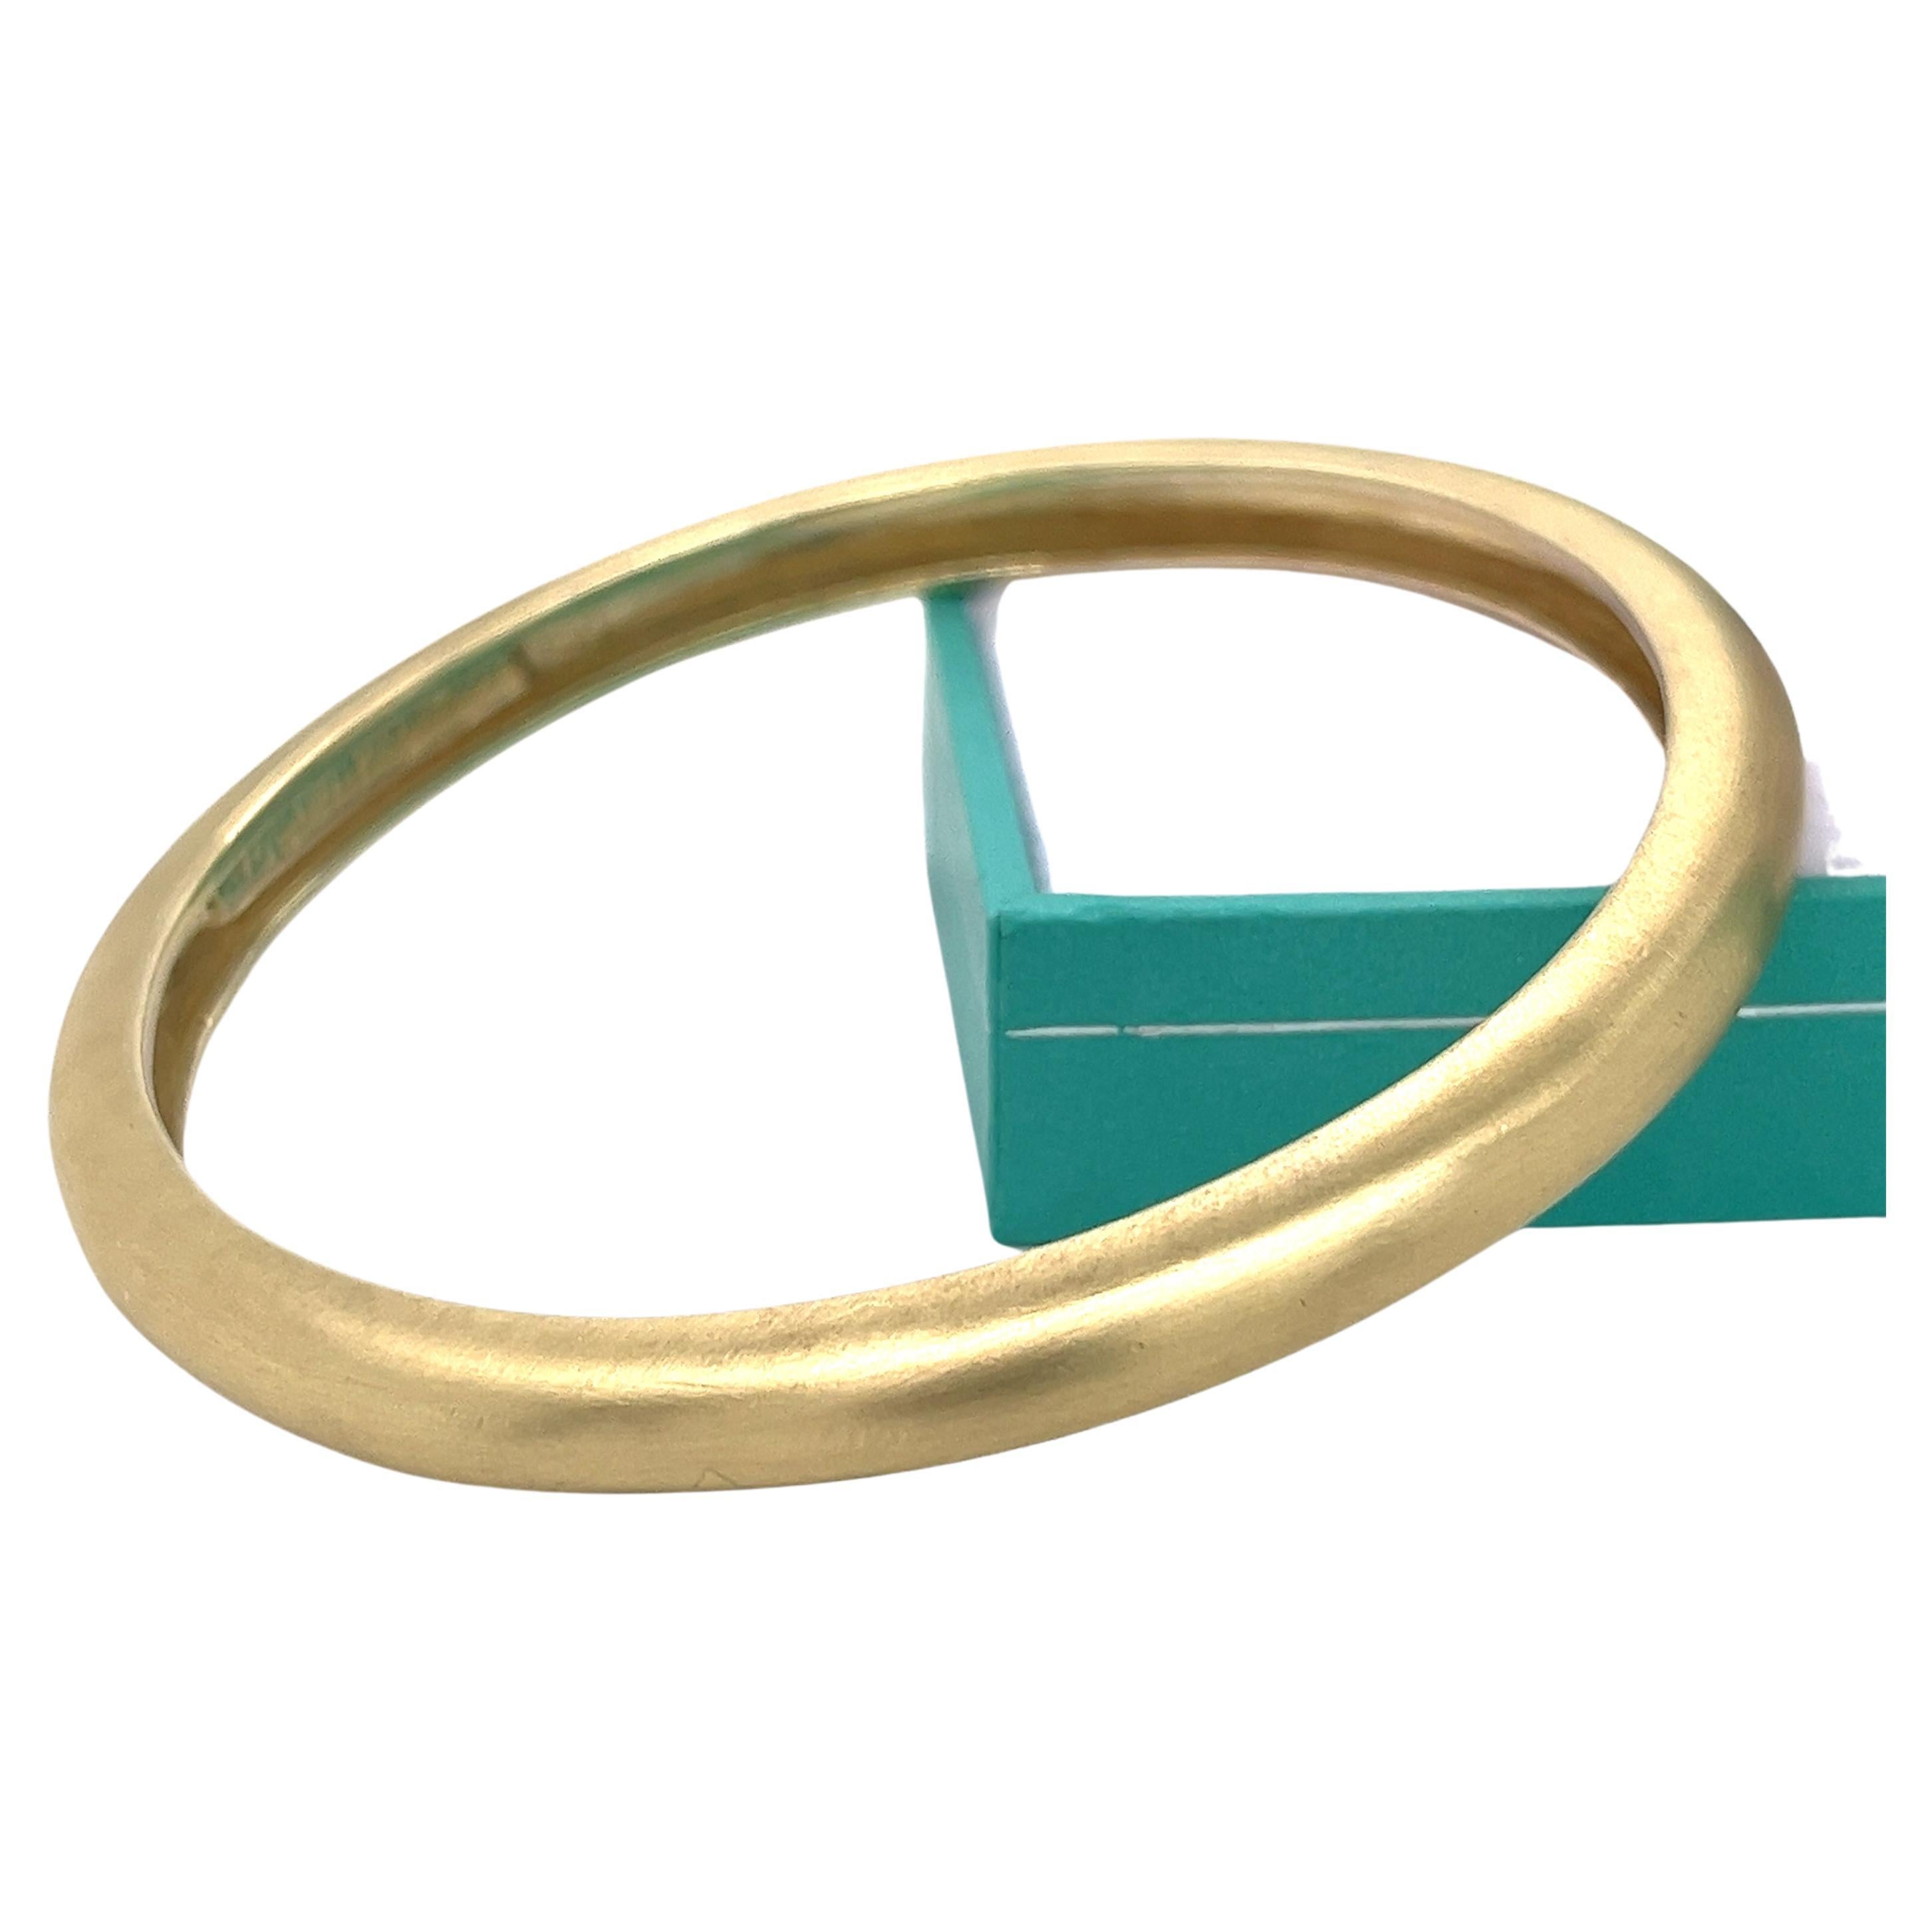 This 14 karat yellow gold bangle bracelet from Mignon Faget is a beautiful piece of jewelry. With a width of 6.35mm and a diameter of 2.5 inches, it has a brushed gold finish that adds texture and character to the design. Weighing in at 48 grams,